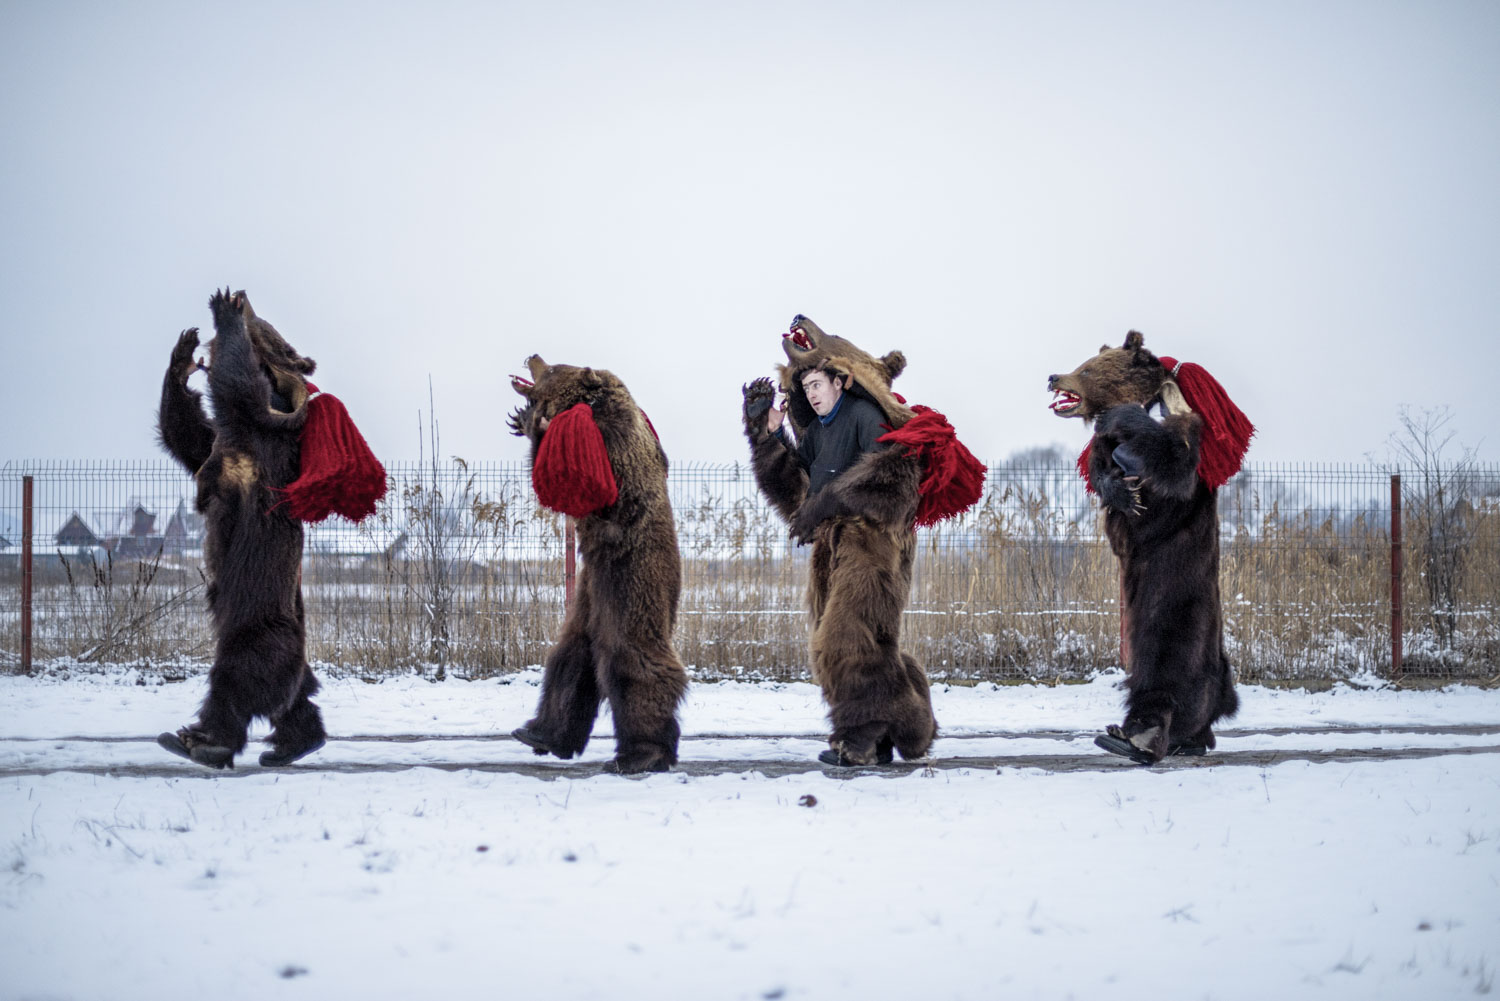  Dumitru Toloaca's troupe of bears dance their way single-file through Comăneşti town, stopping at private homes where they've been invited to perform. December 28, 2014. Comăneşti town, Bacău county, Romania. 